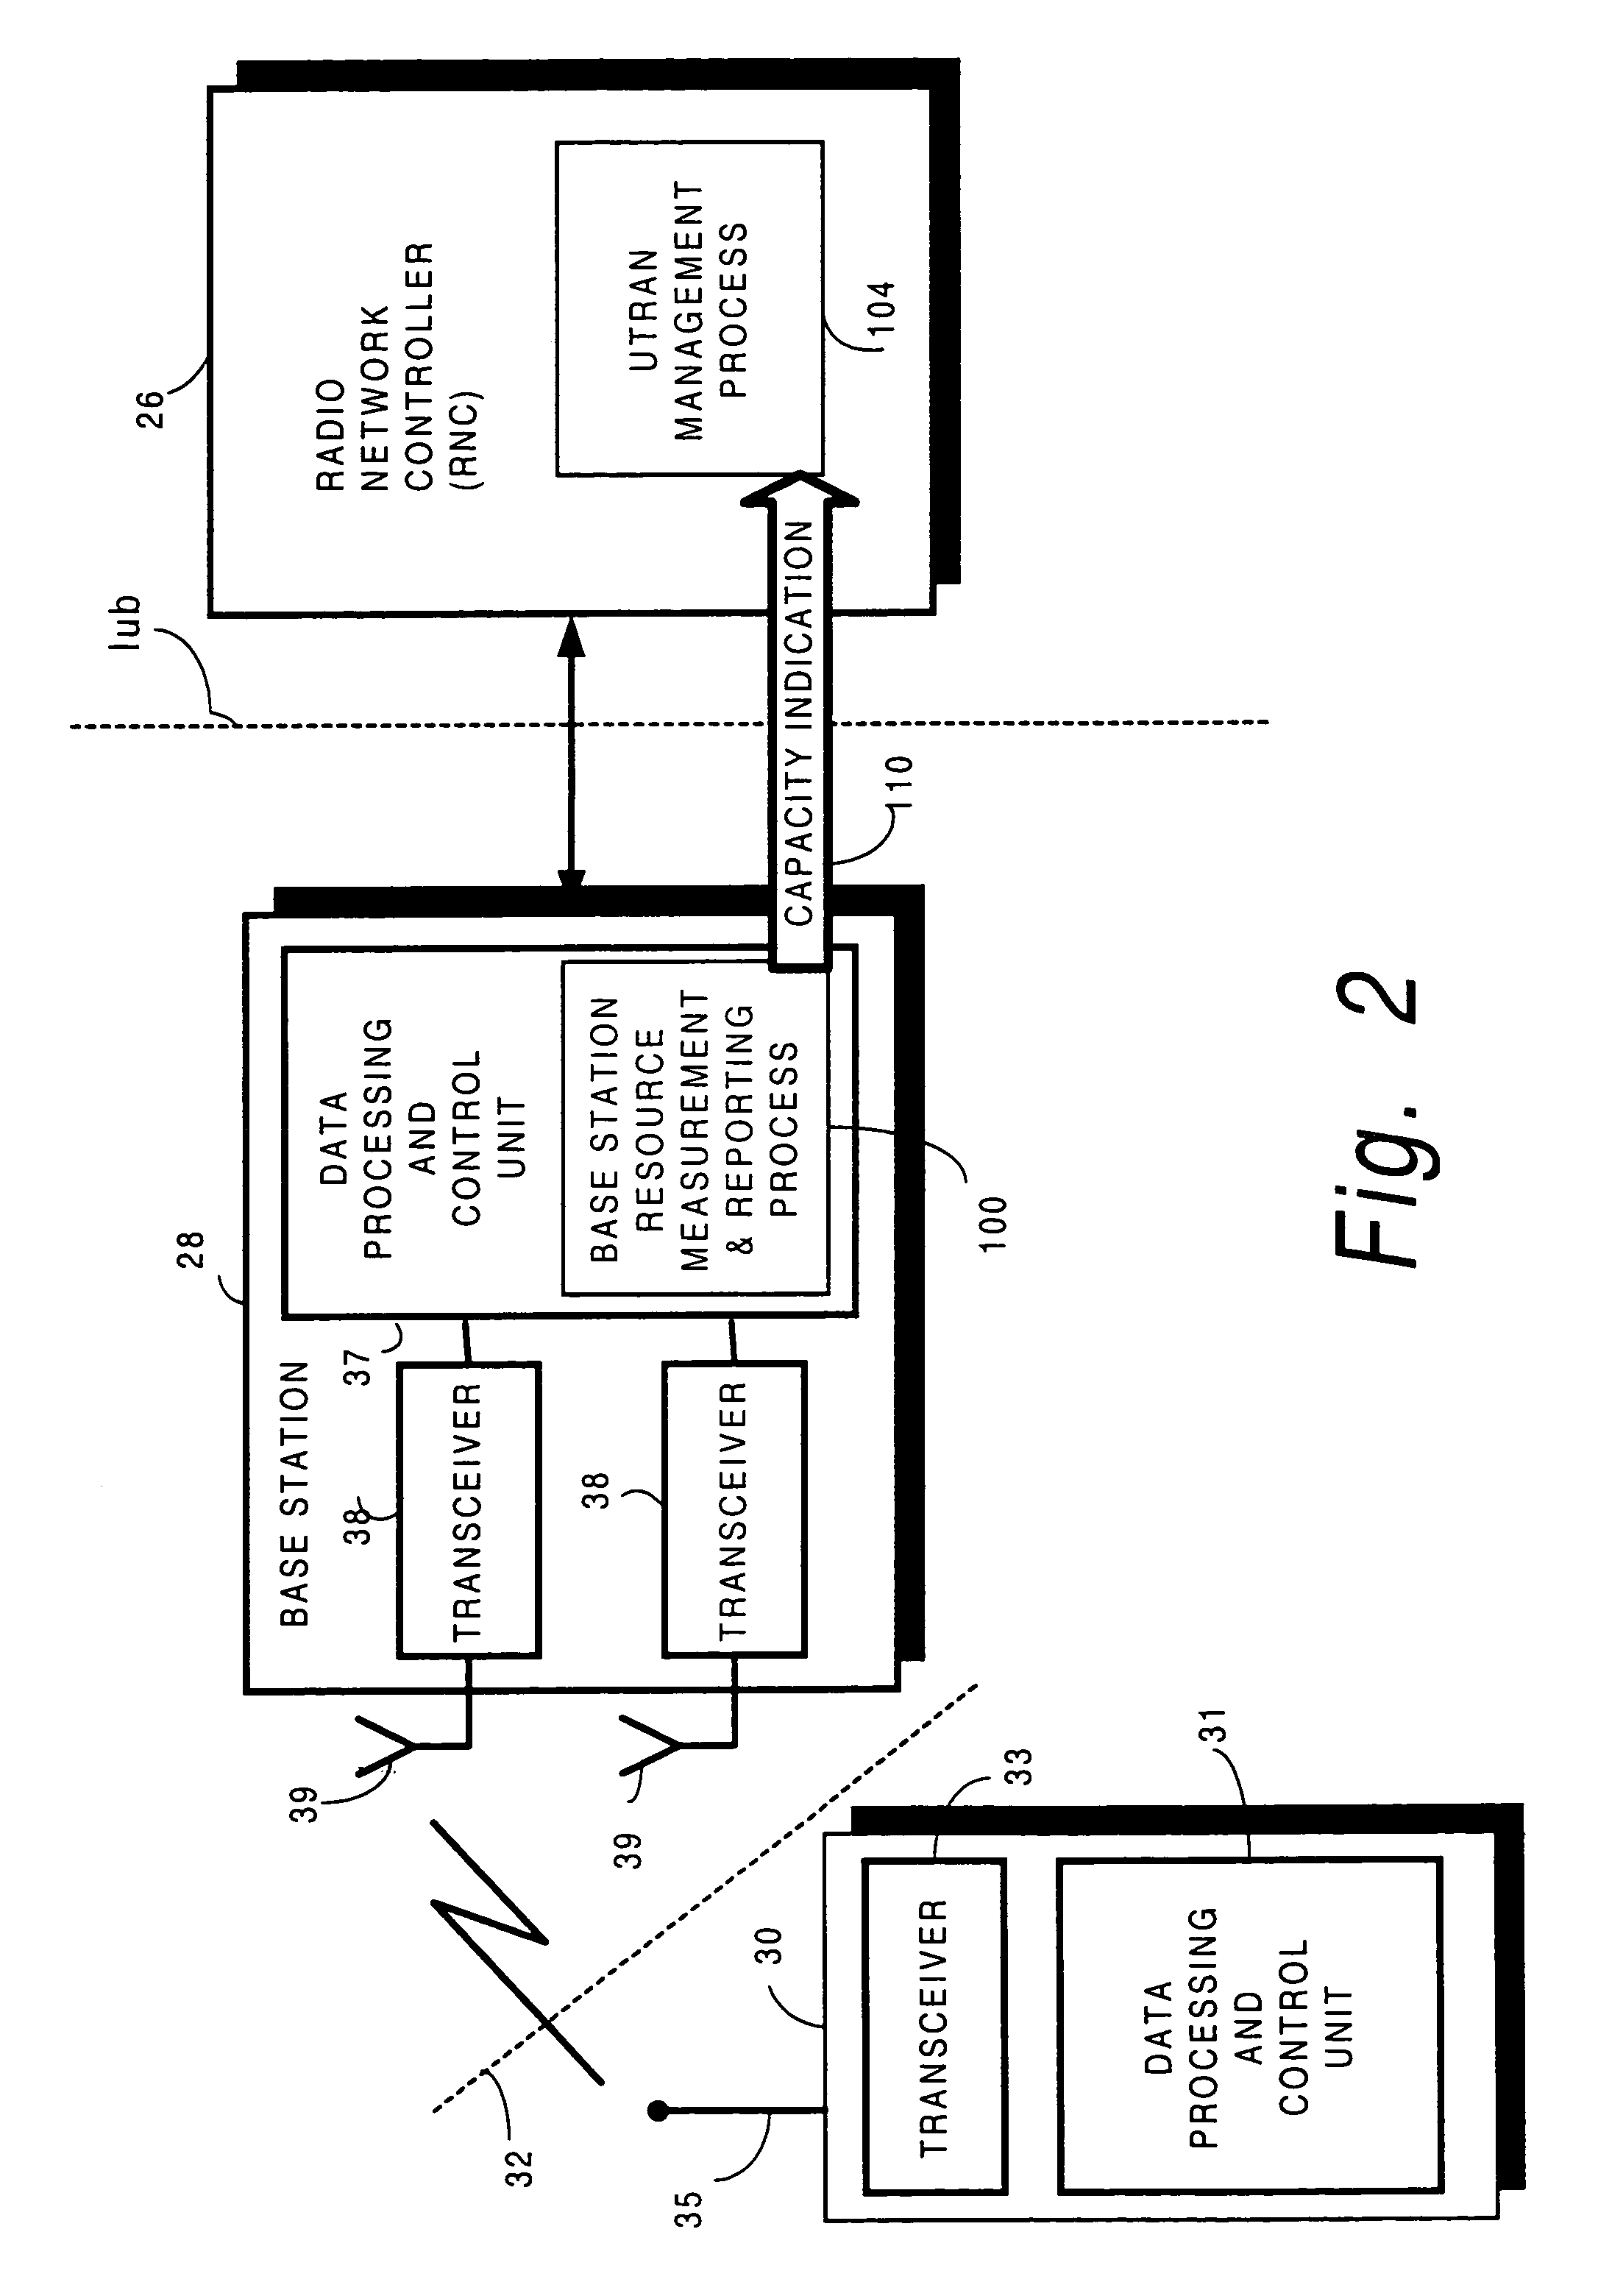 Resource capacity reporting to control node of radio access network